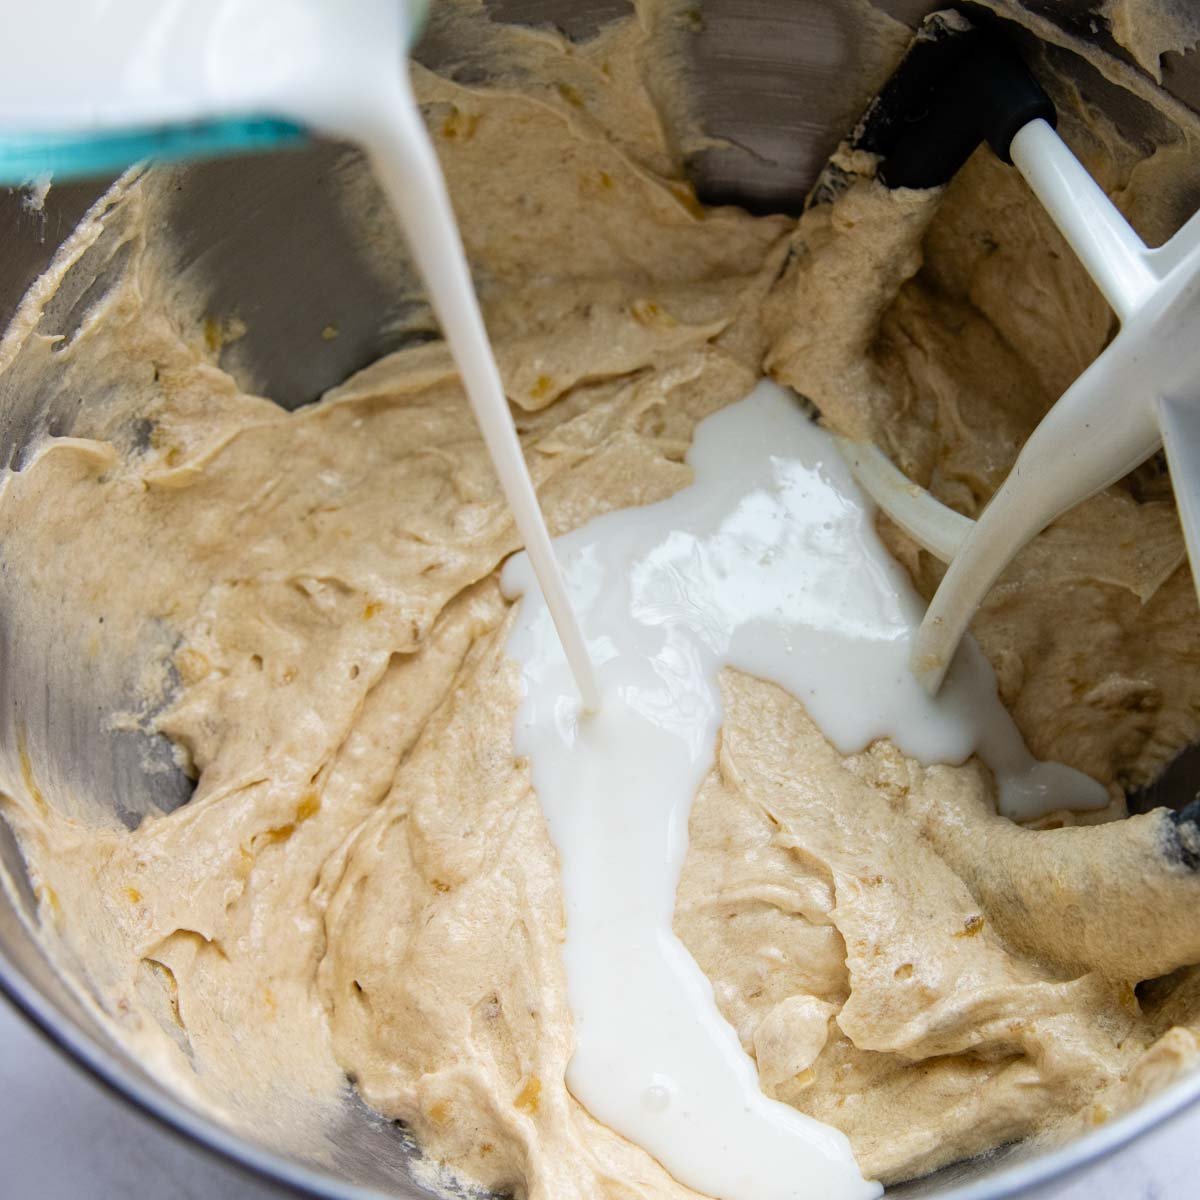 buttermilk being poured into the batter.